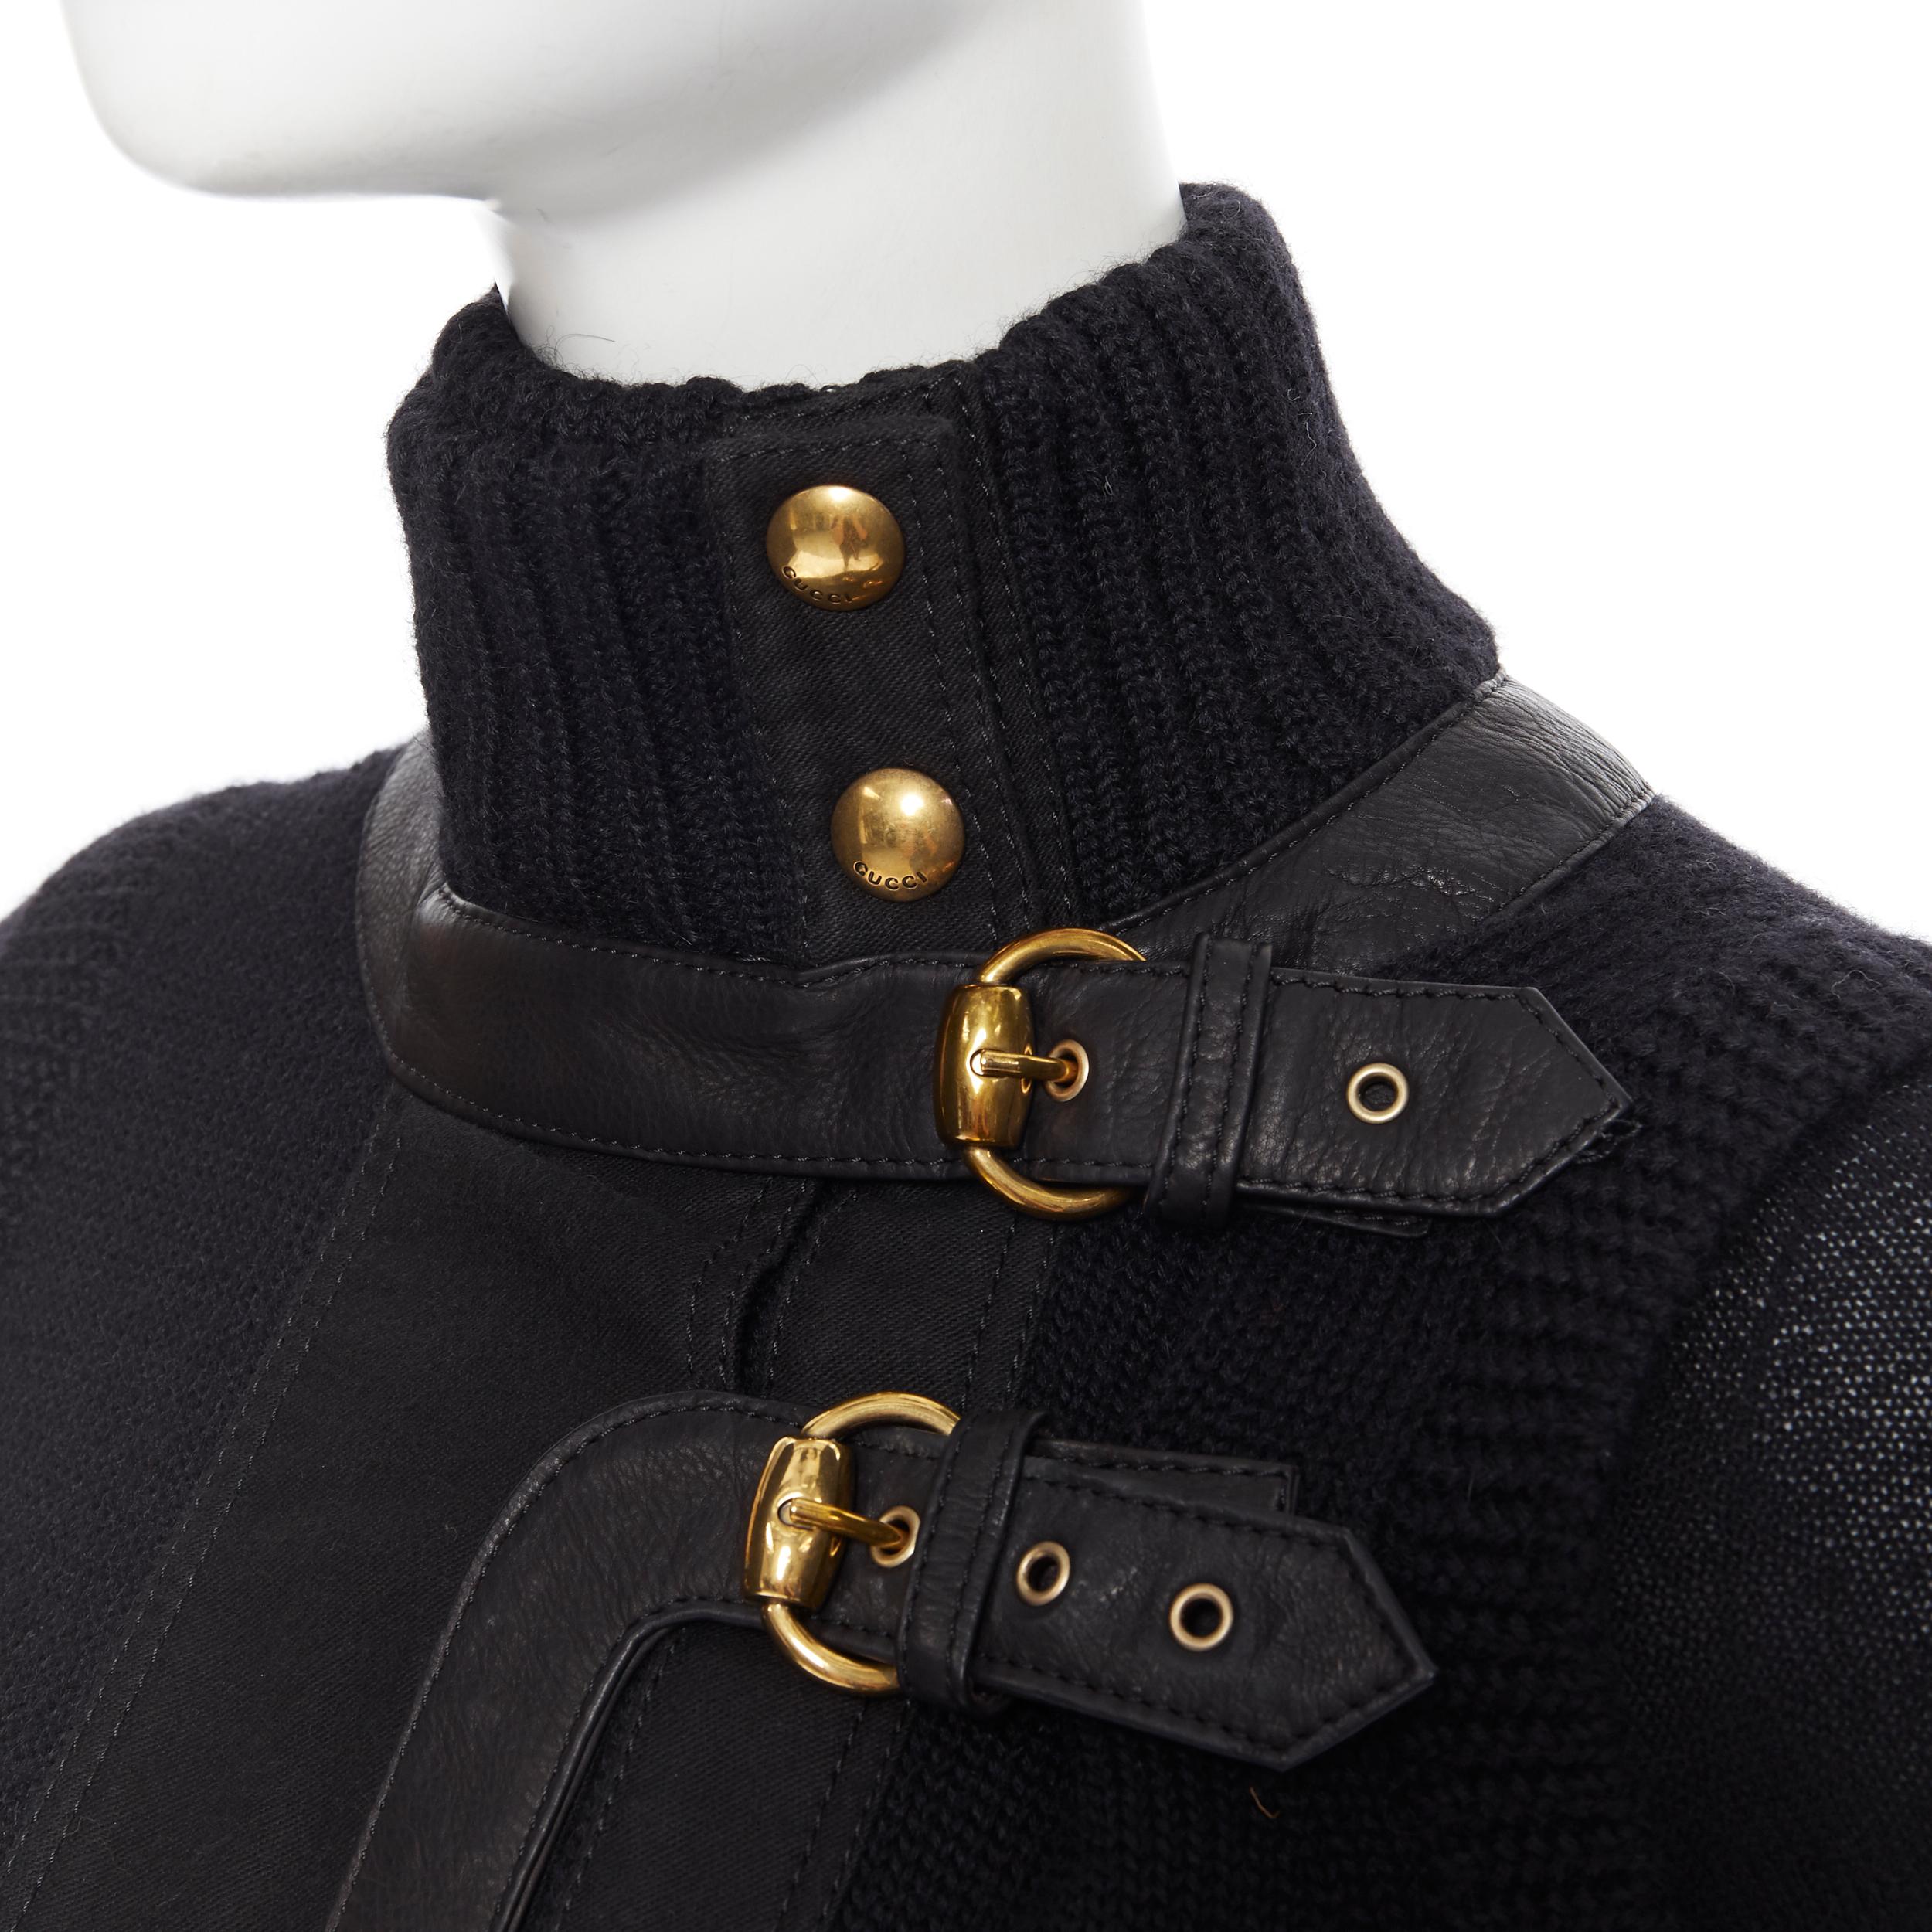 GUCCI 2008 black alpaca wool leather trimmed gold buckle turtleneck sweater XS
Brand: Gucci
Collection: 2008
Model Name / Style: Alpaca sweater
Material: Alpaca, cotton
Color: Black
Pattern: Solid
Closure: Snap
Extra Detail: Black leather trimming